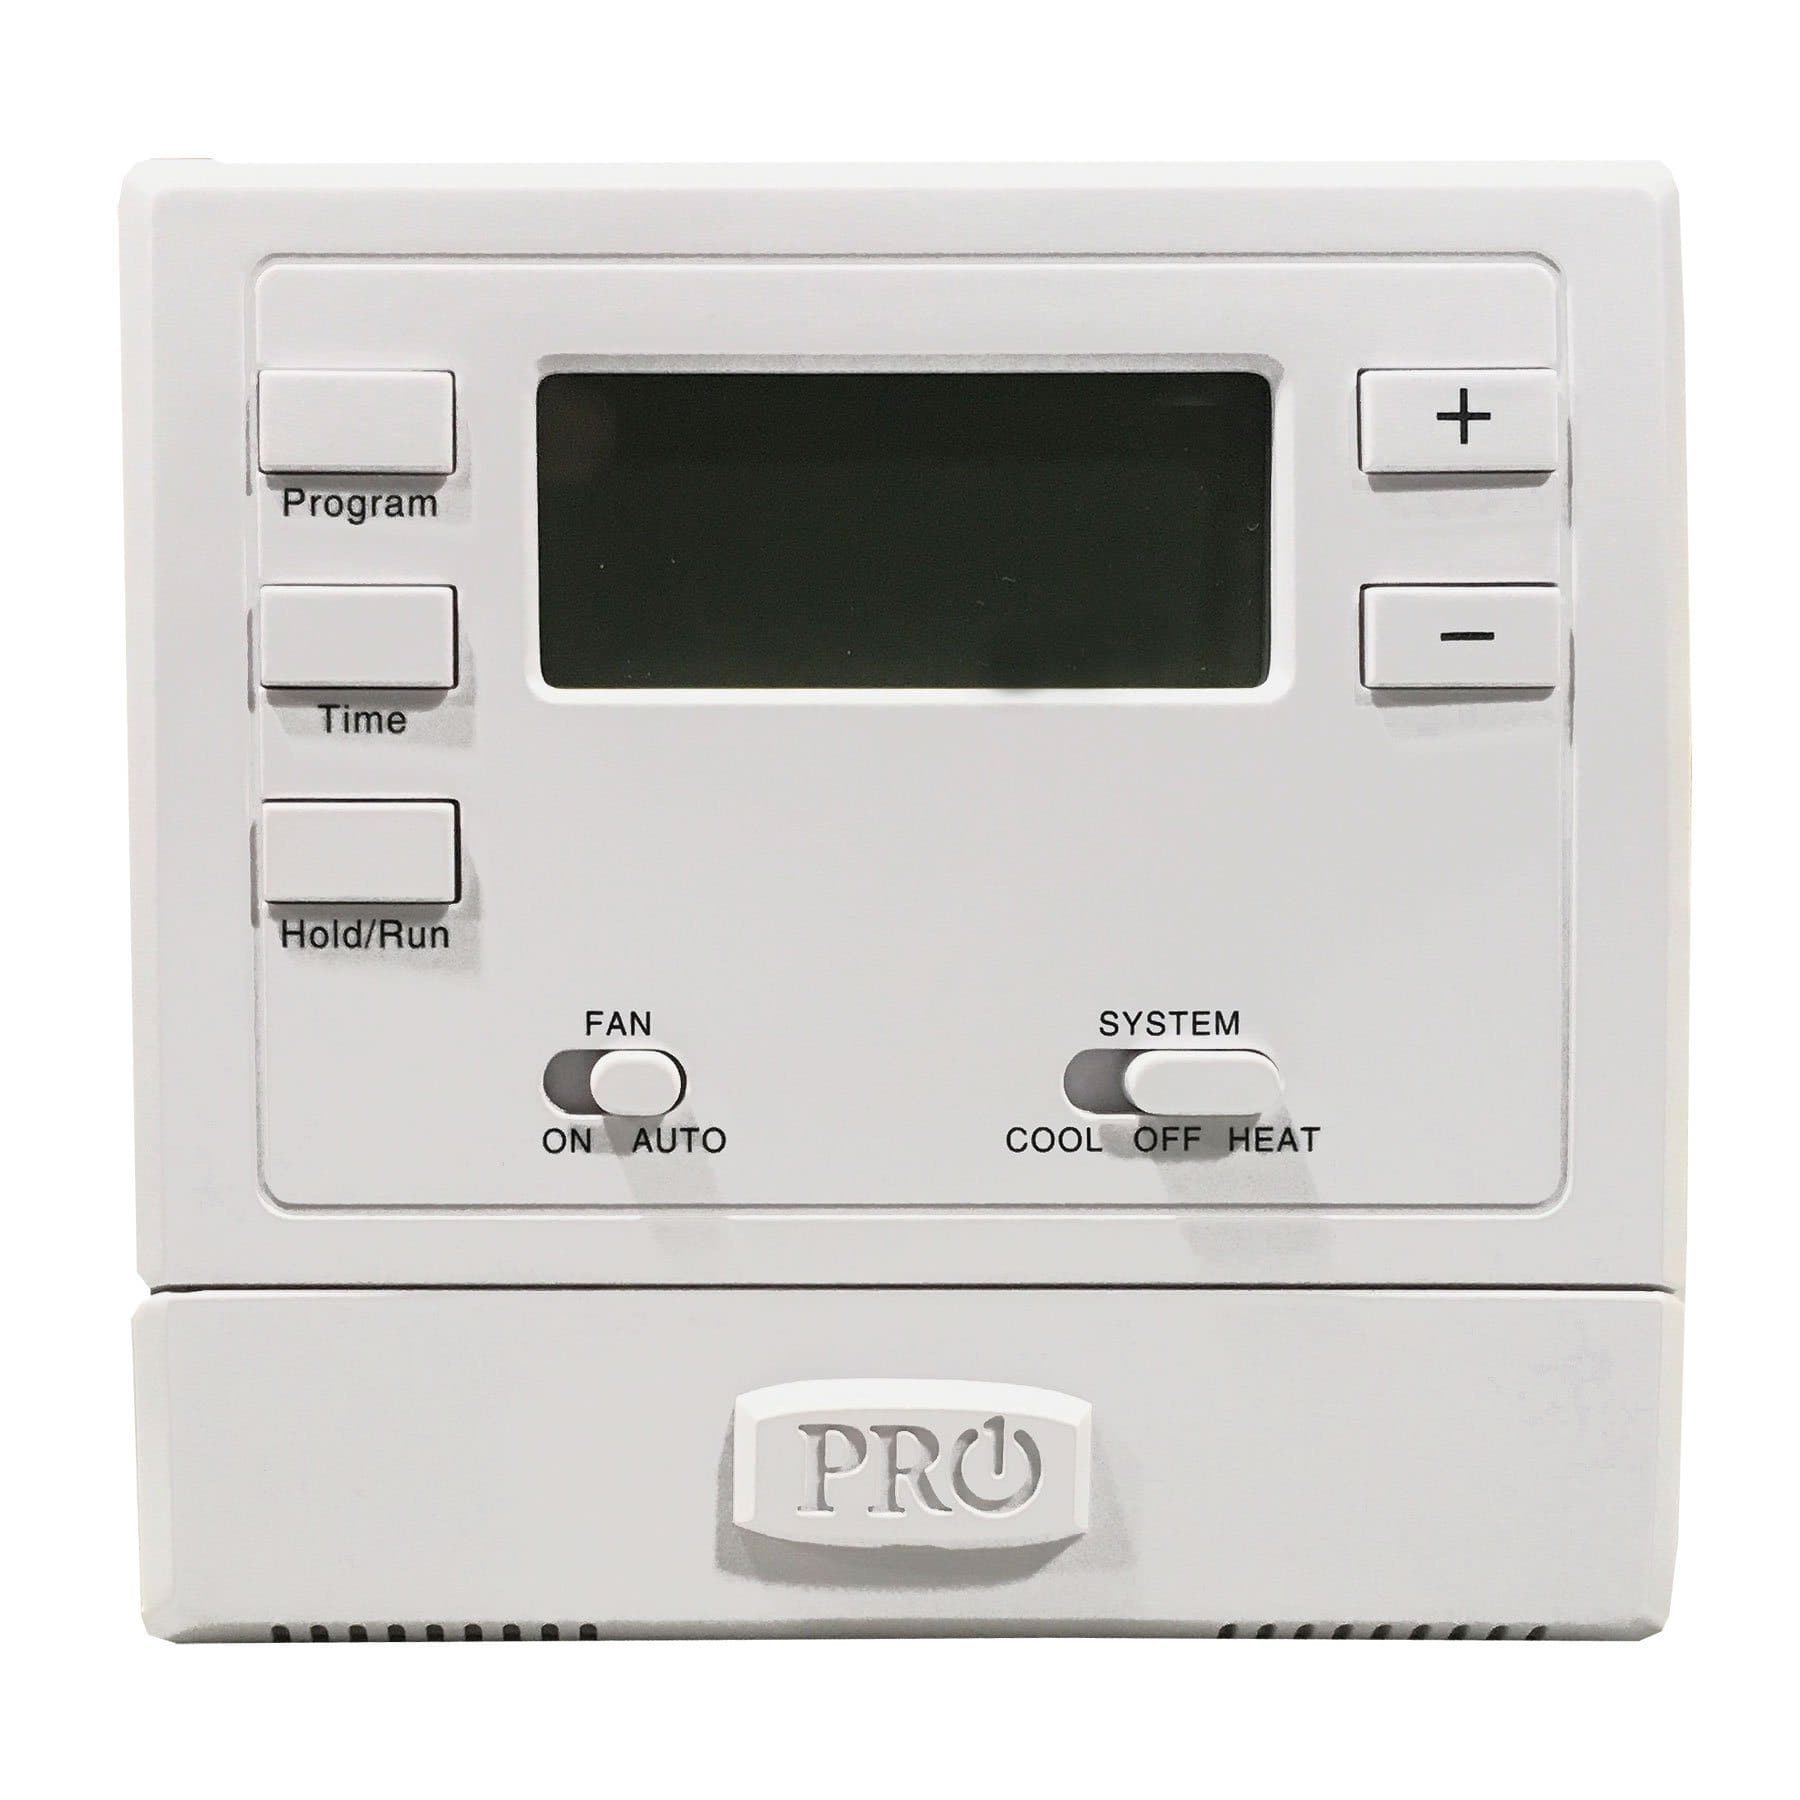 Pro1 T605-2 1H/1C 5+1+1 Programmable Thermostat